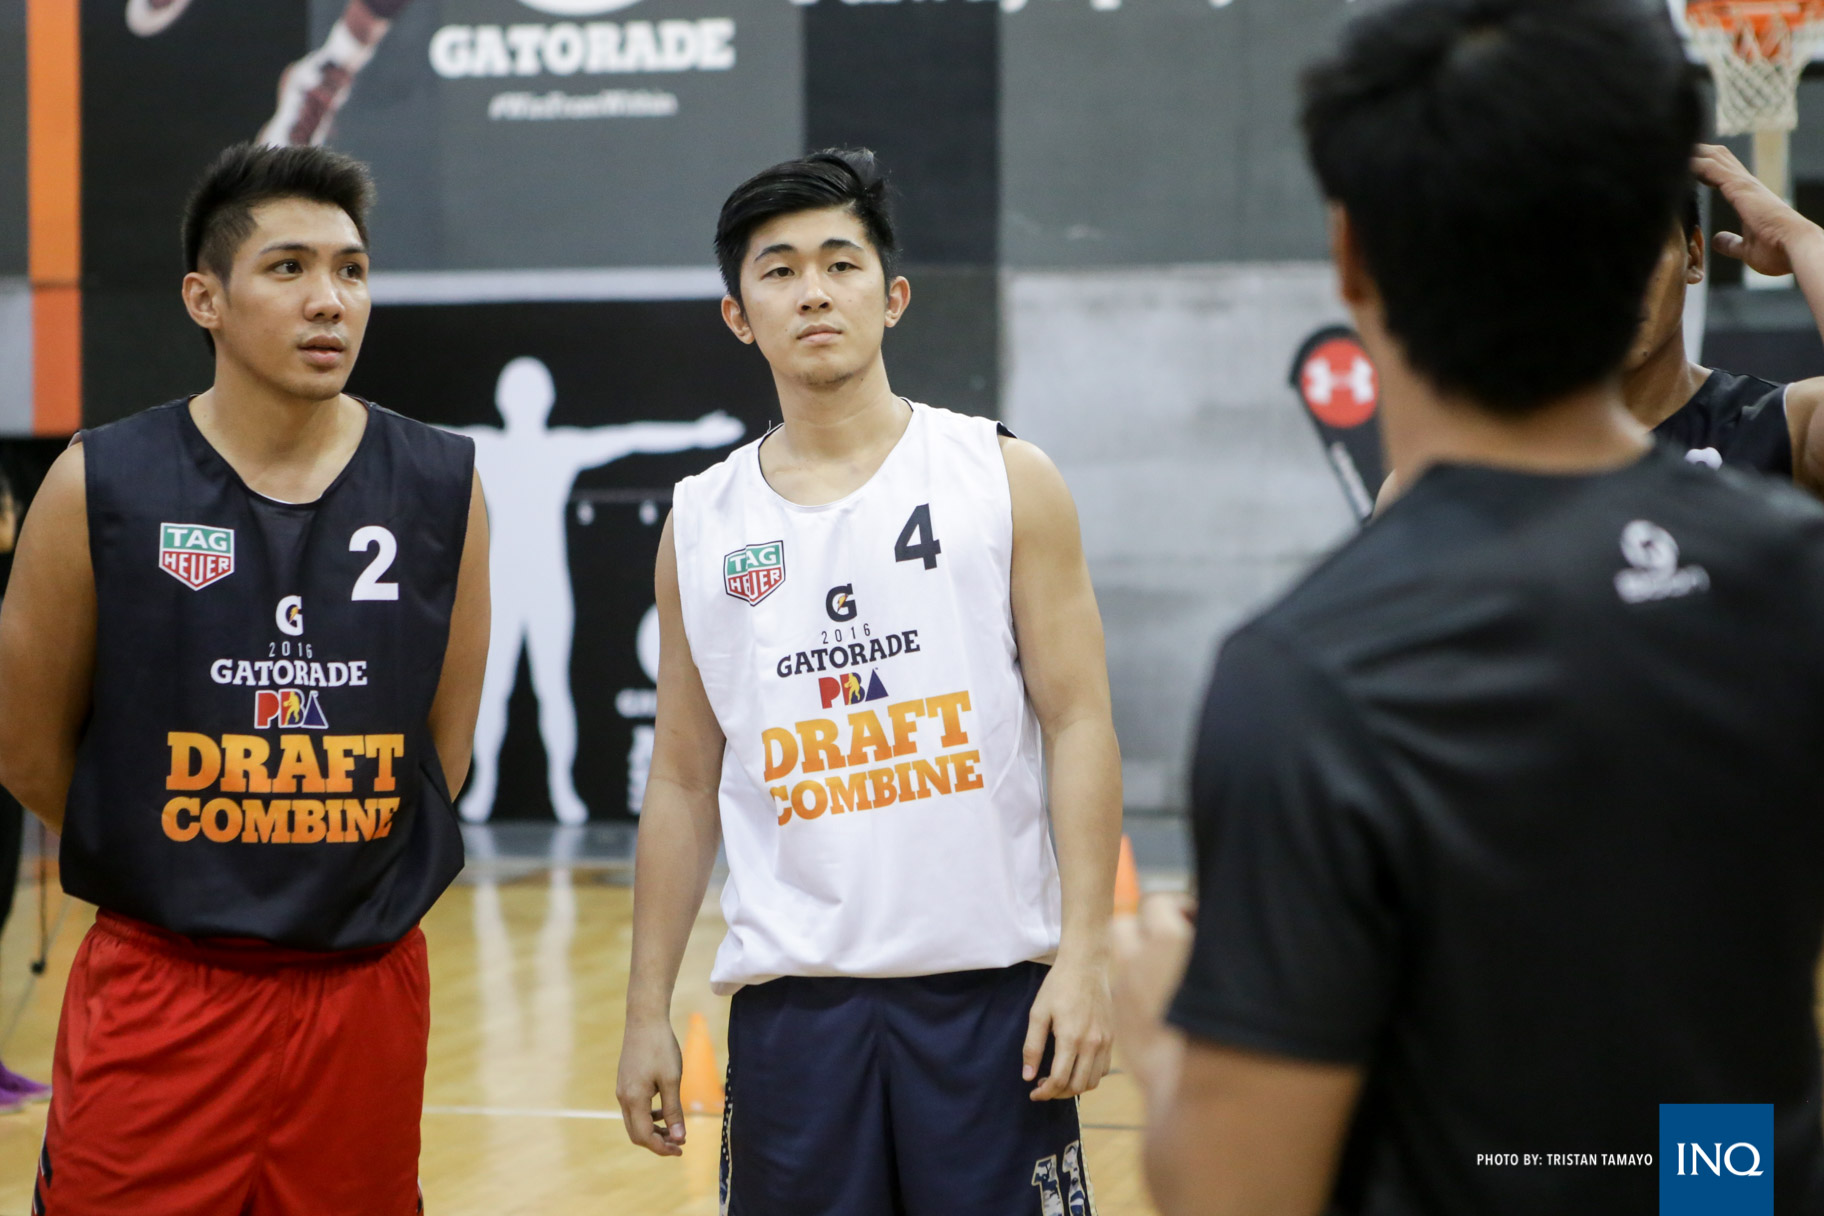 Pao Javellona at the 2016 PBA Rookie Draft Combine. Photo by Tristan Tamayo/INQUIRER.net